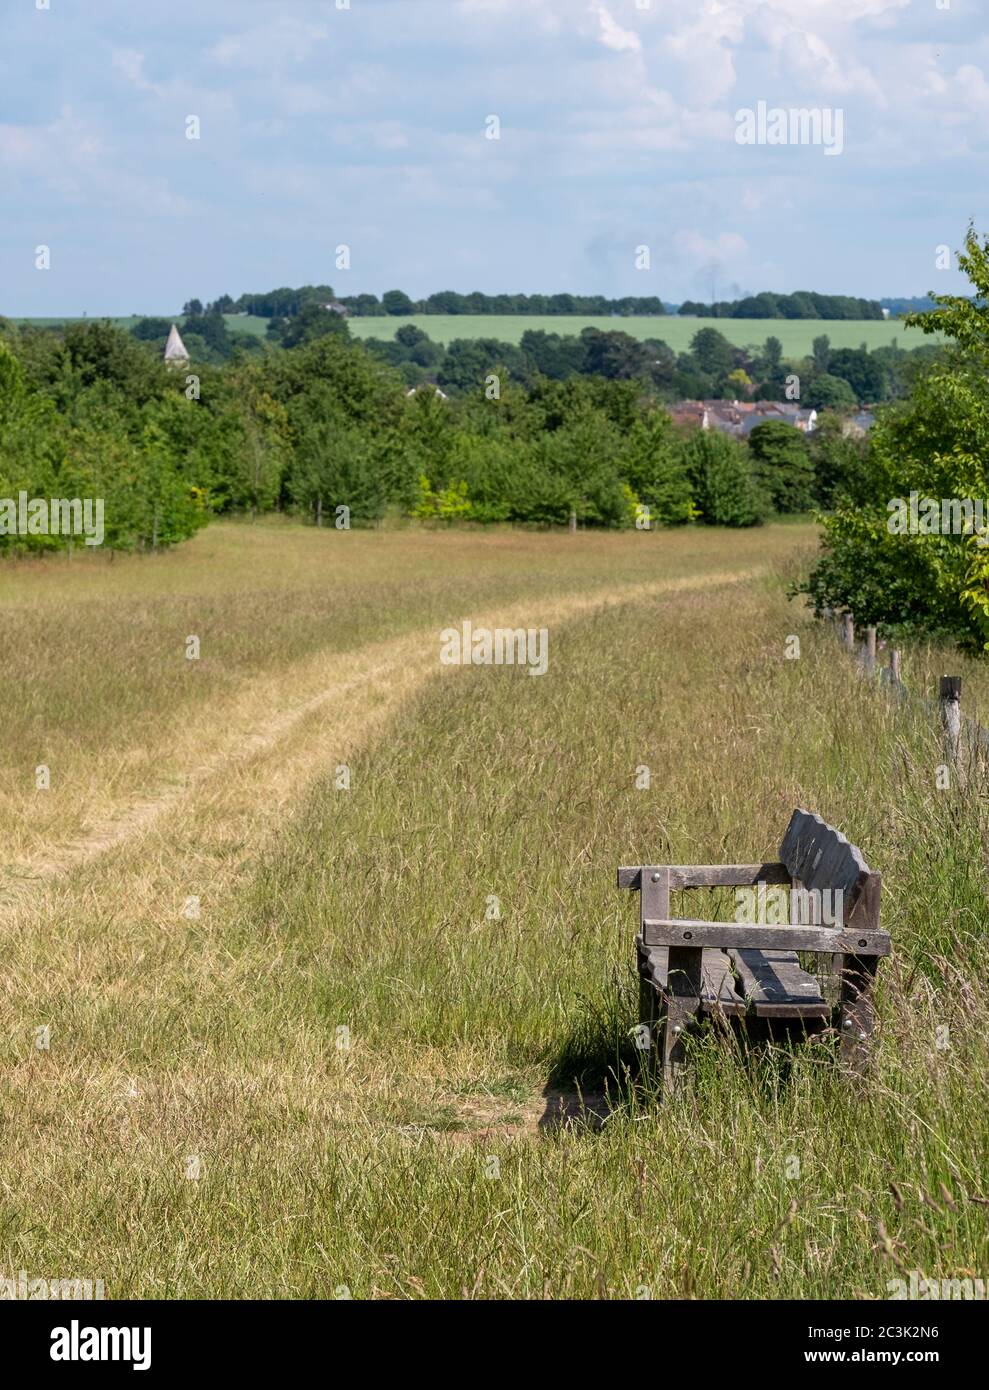 Village of Sandridge on the horizon, photographed with a wooden bench in the foreground from Heartwood Forest, near St Albans, Hertfordshire UK. Stock Photo